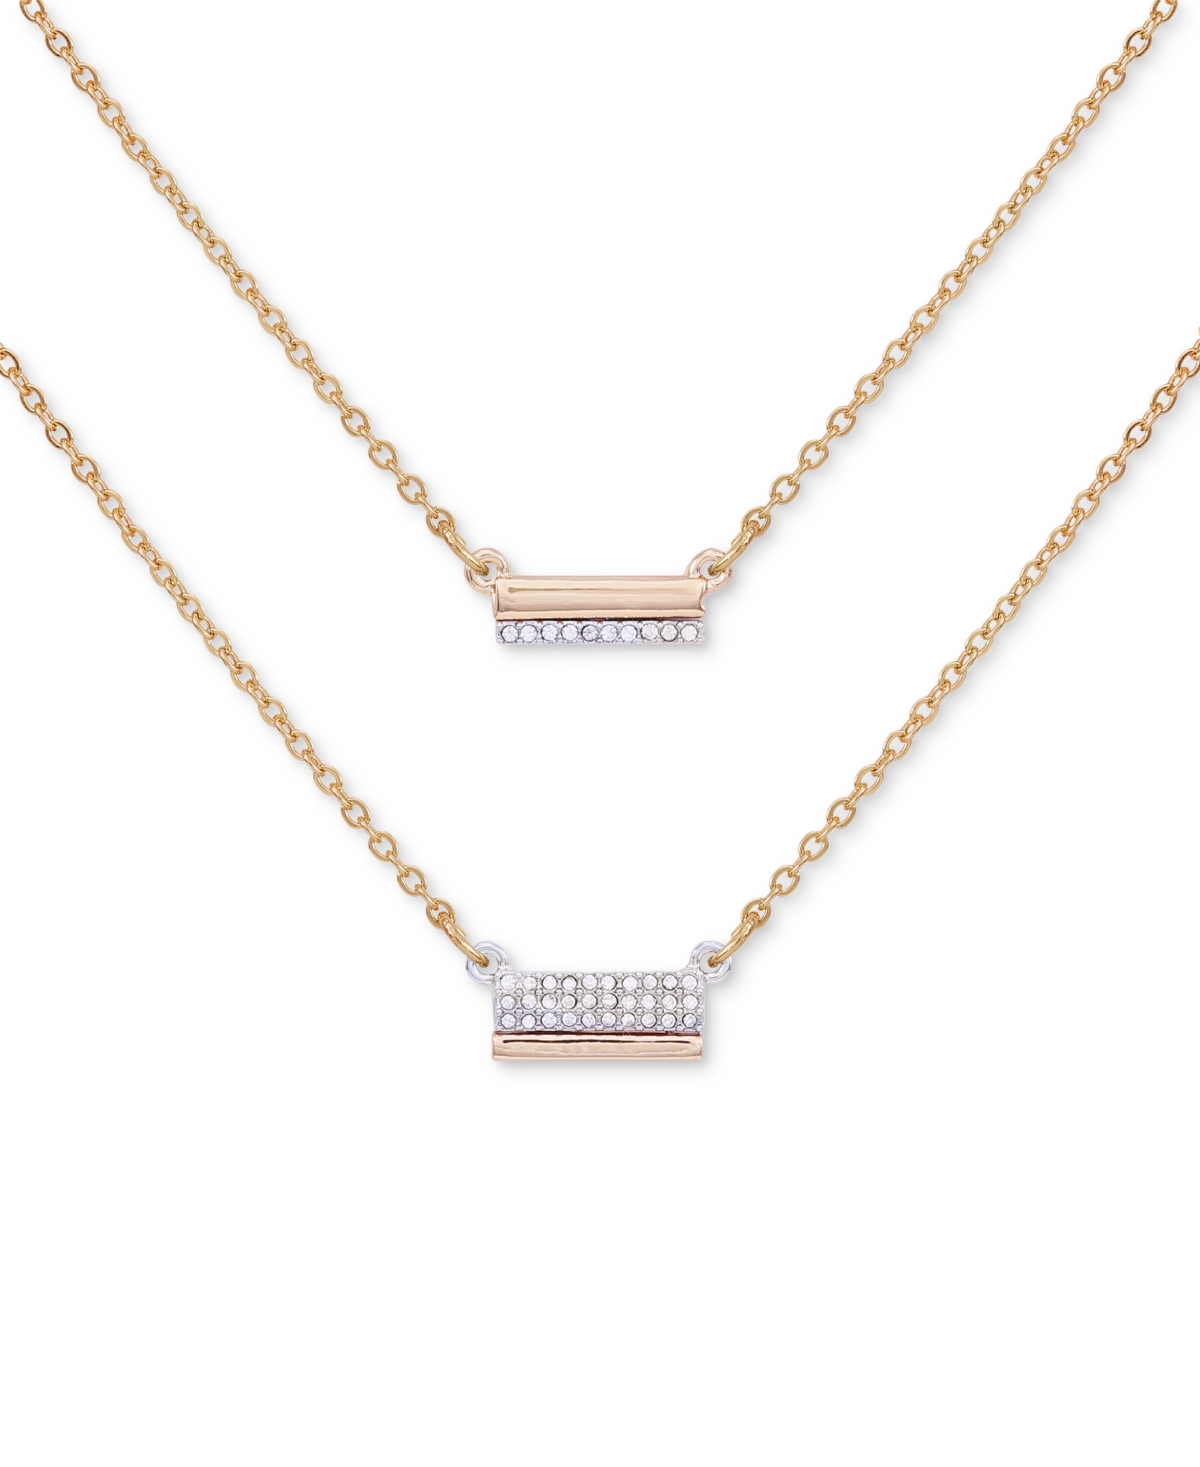 Guess Two-tone 2-pc. Set Pave Bar Pendant Necklaces, 16" + 2" Extender In Gold